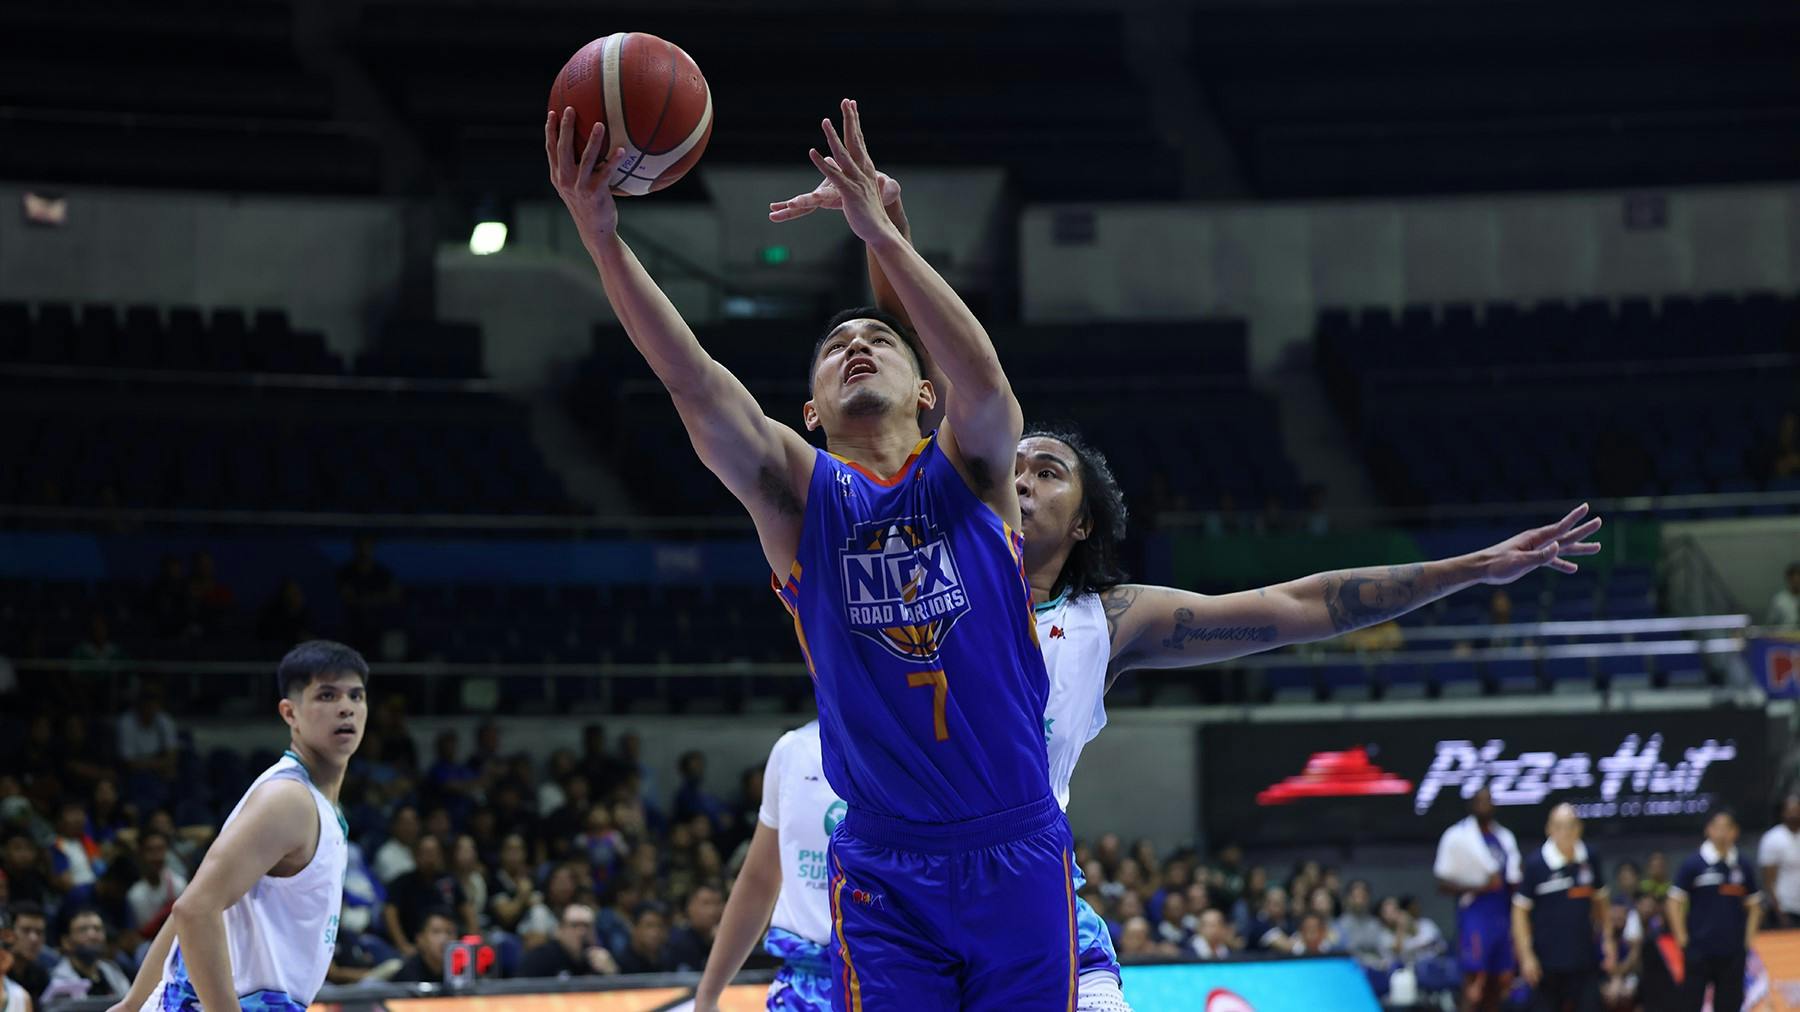 Road to recovery: NLEX guard Kevin Alas gives huge update on ACL injury
